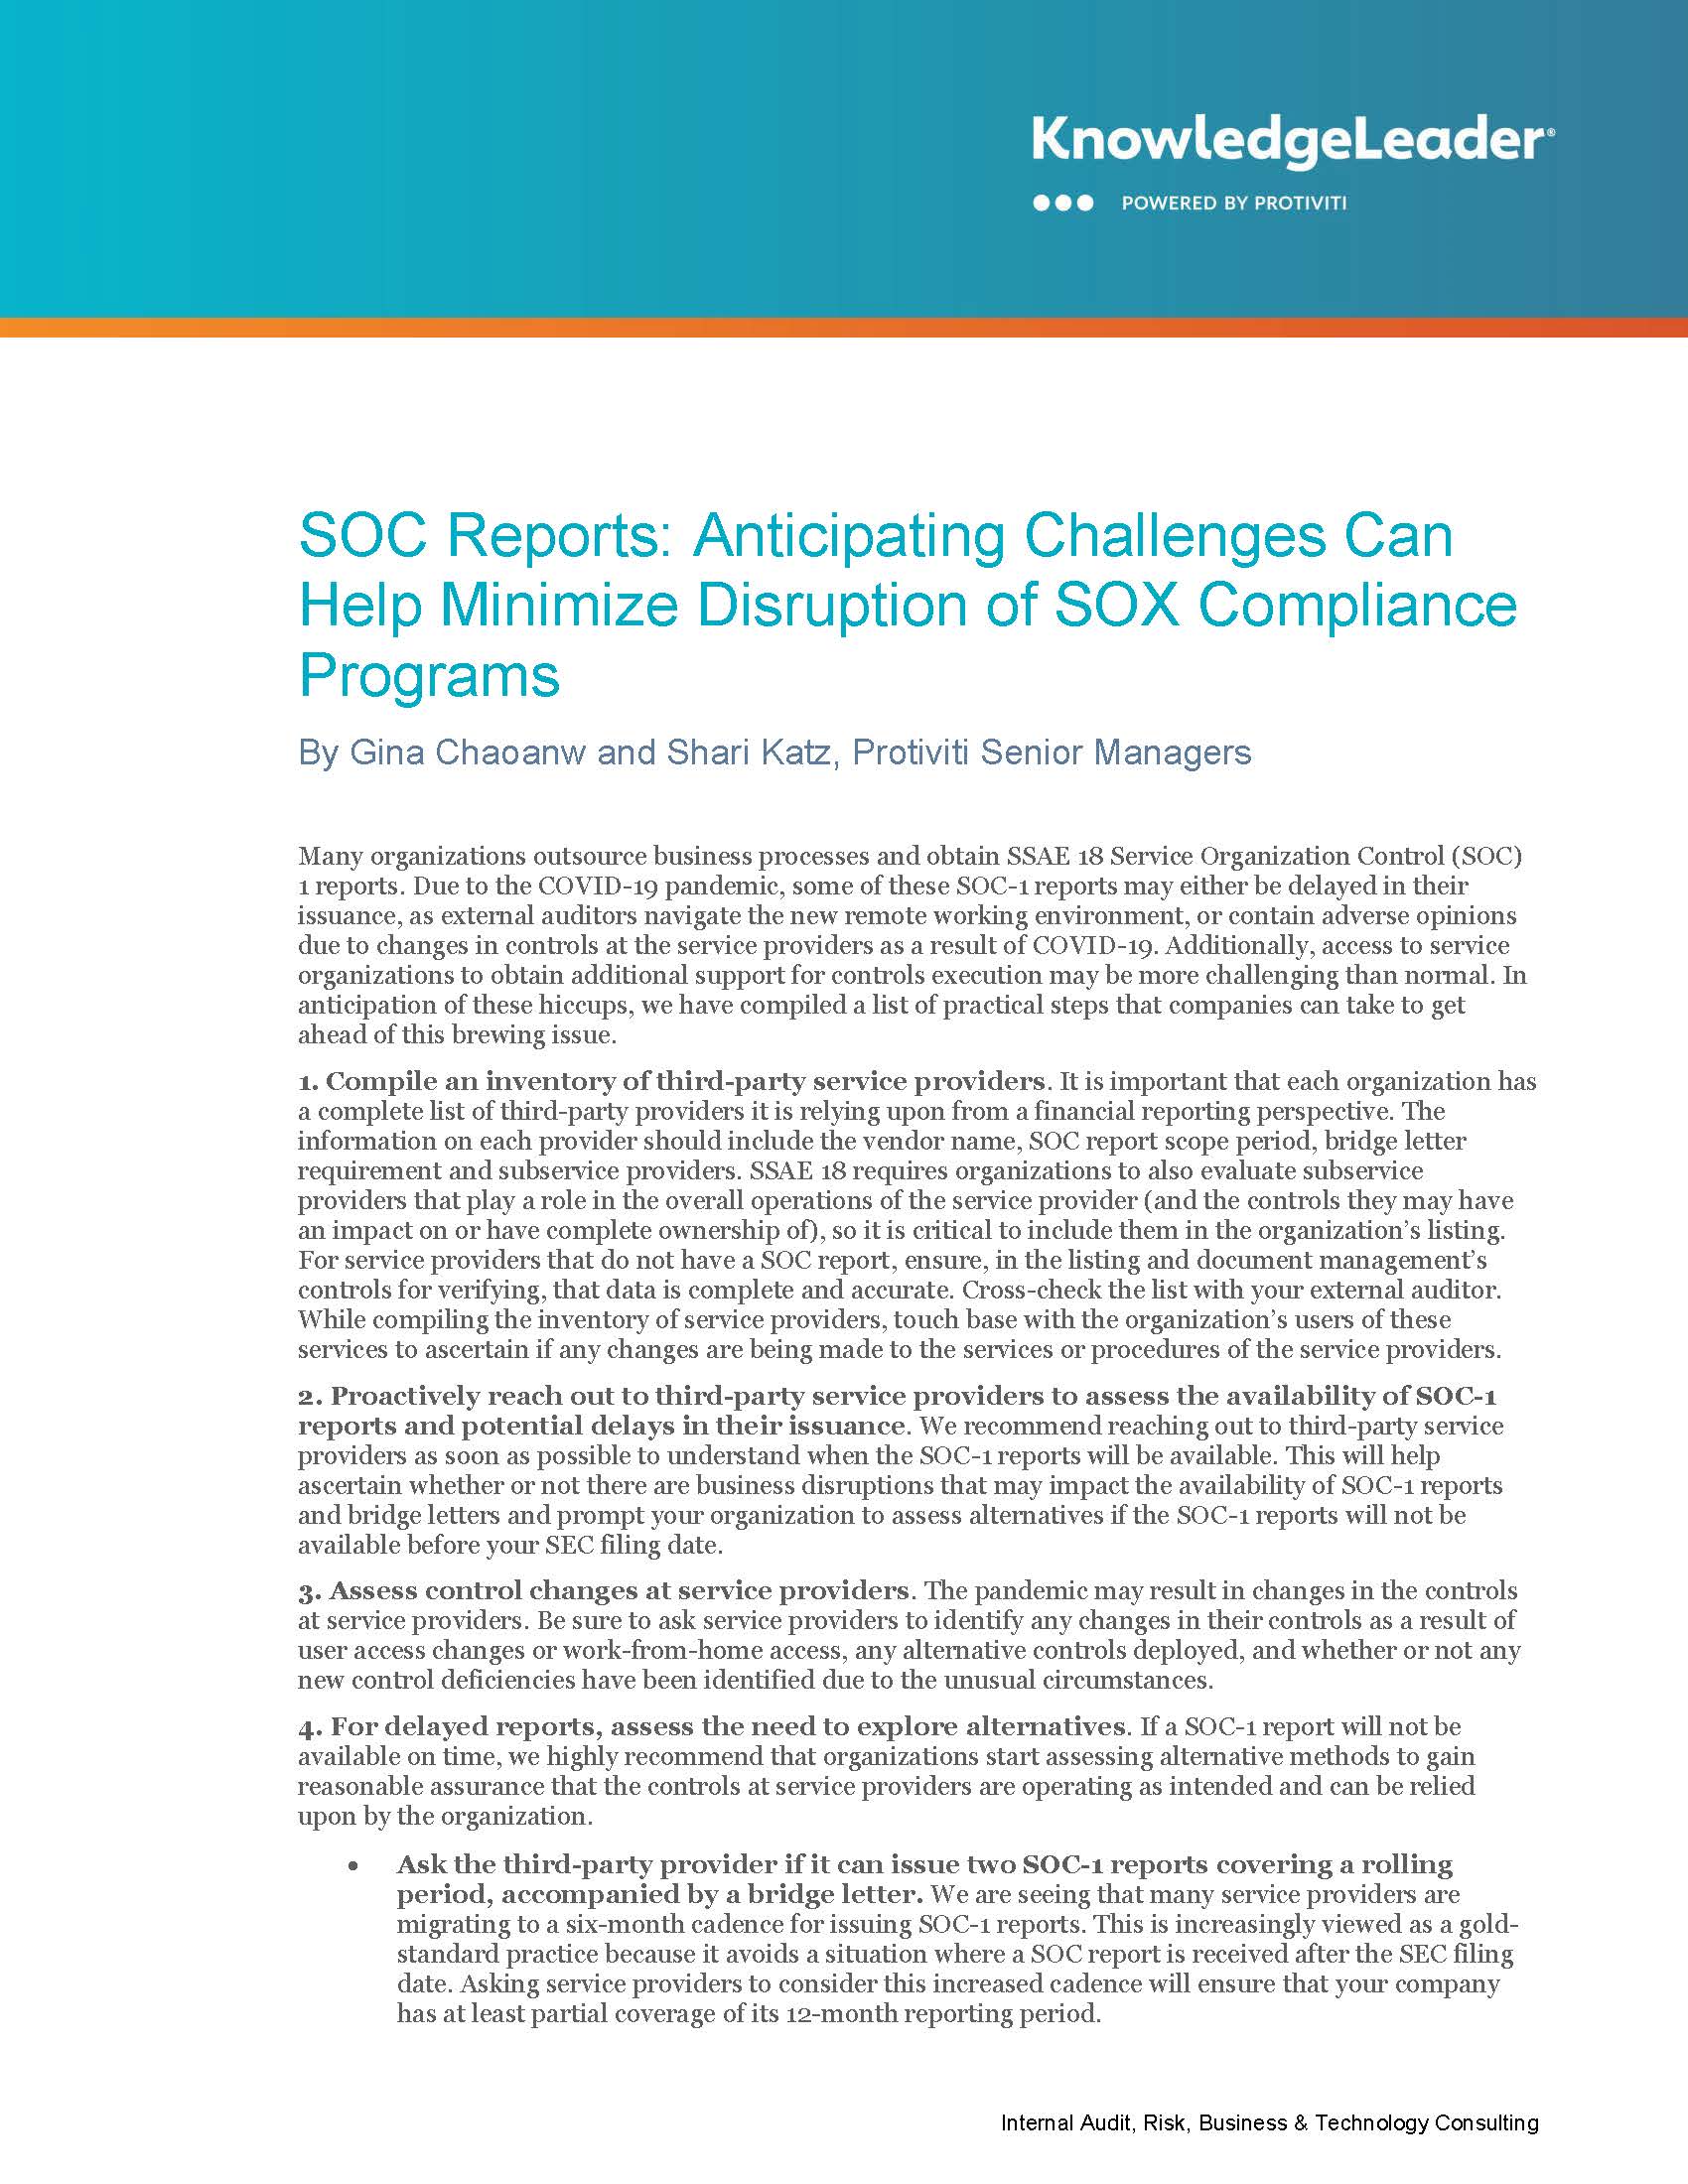 SOC Reports: Anticipating Challenges Can Help Minimize Disruption of SOX Compliance Programs